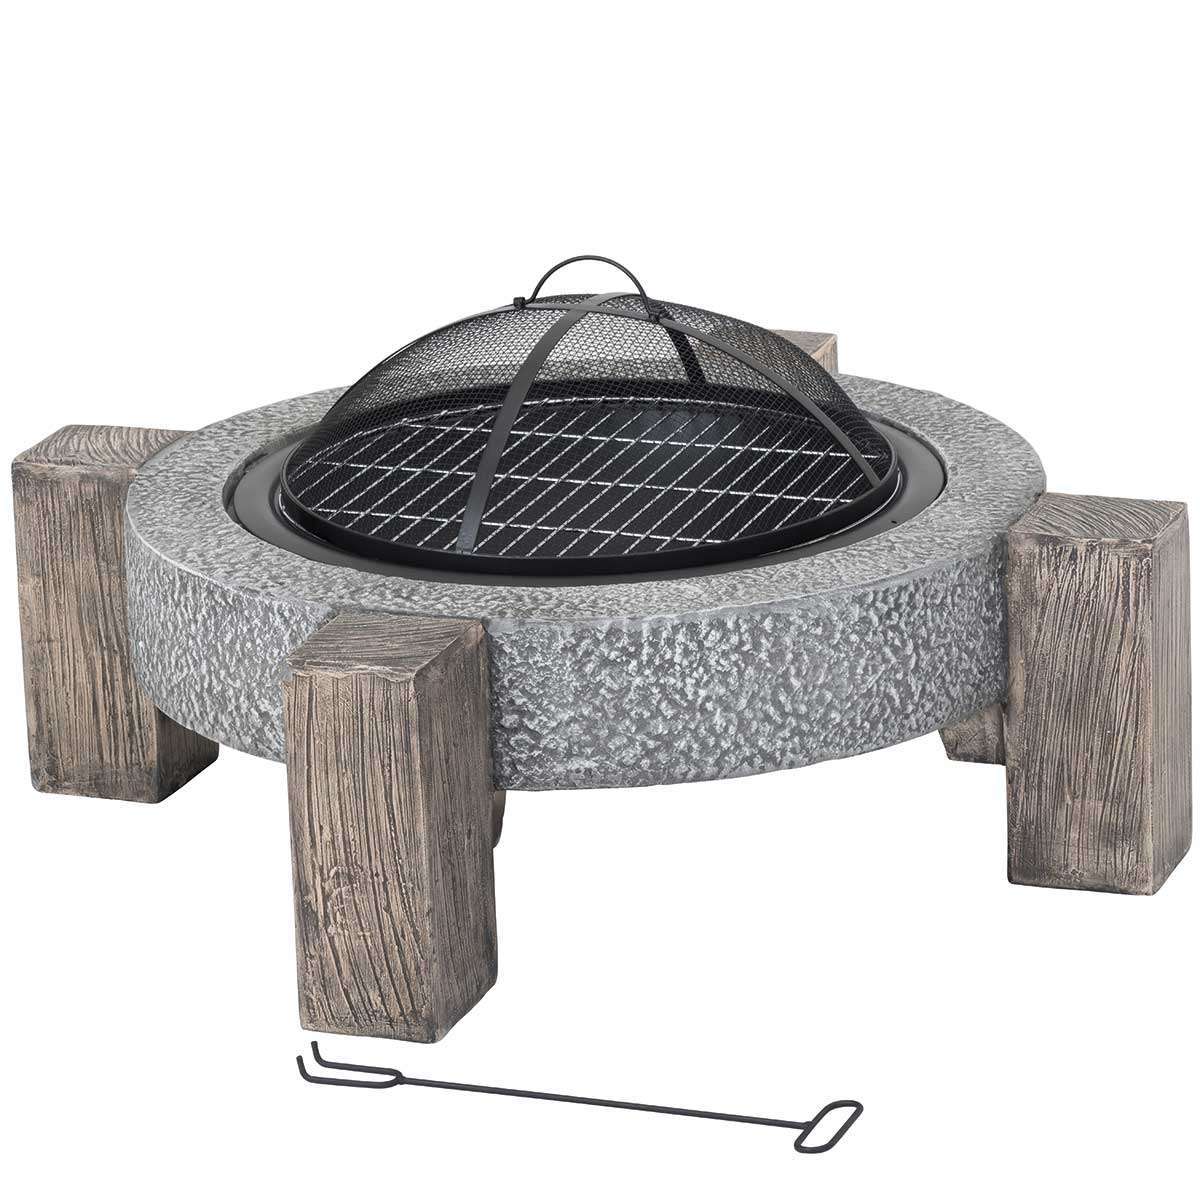 Exceptional Garden:Lifestyle Calida MGO Fire Pit